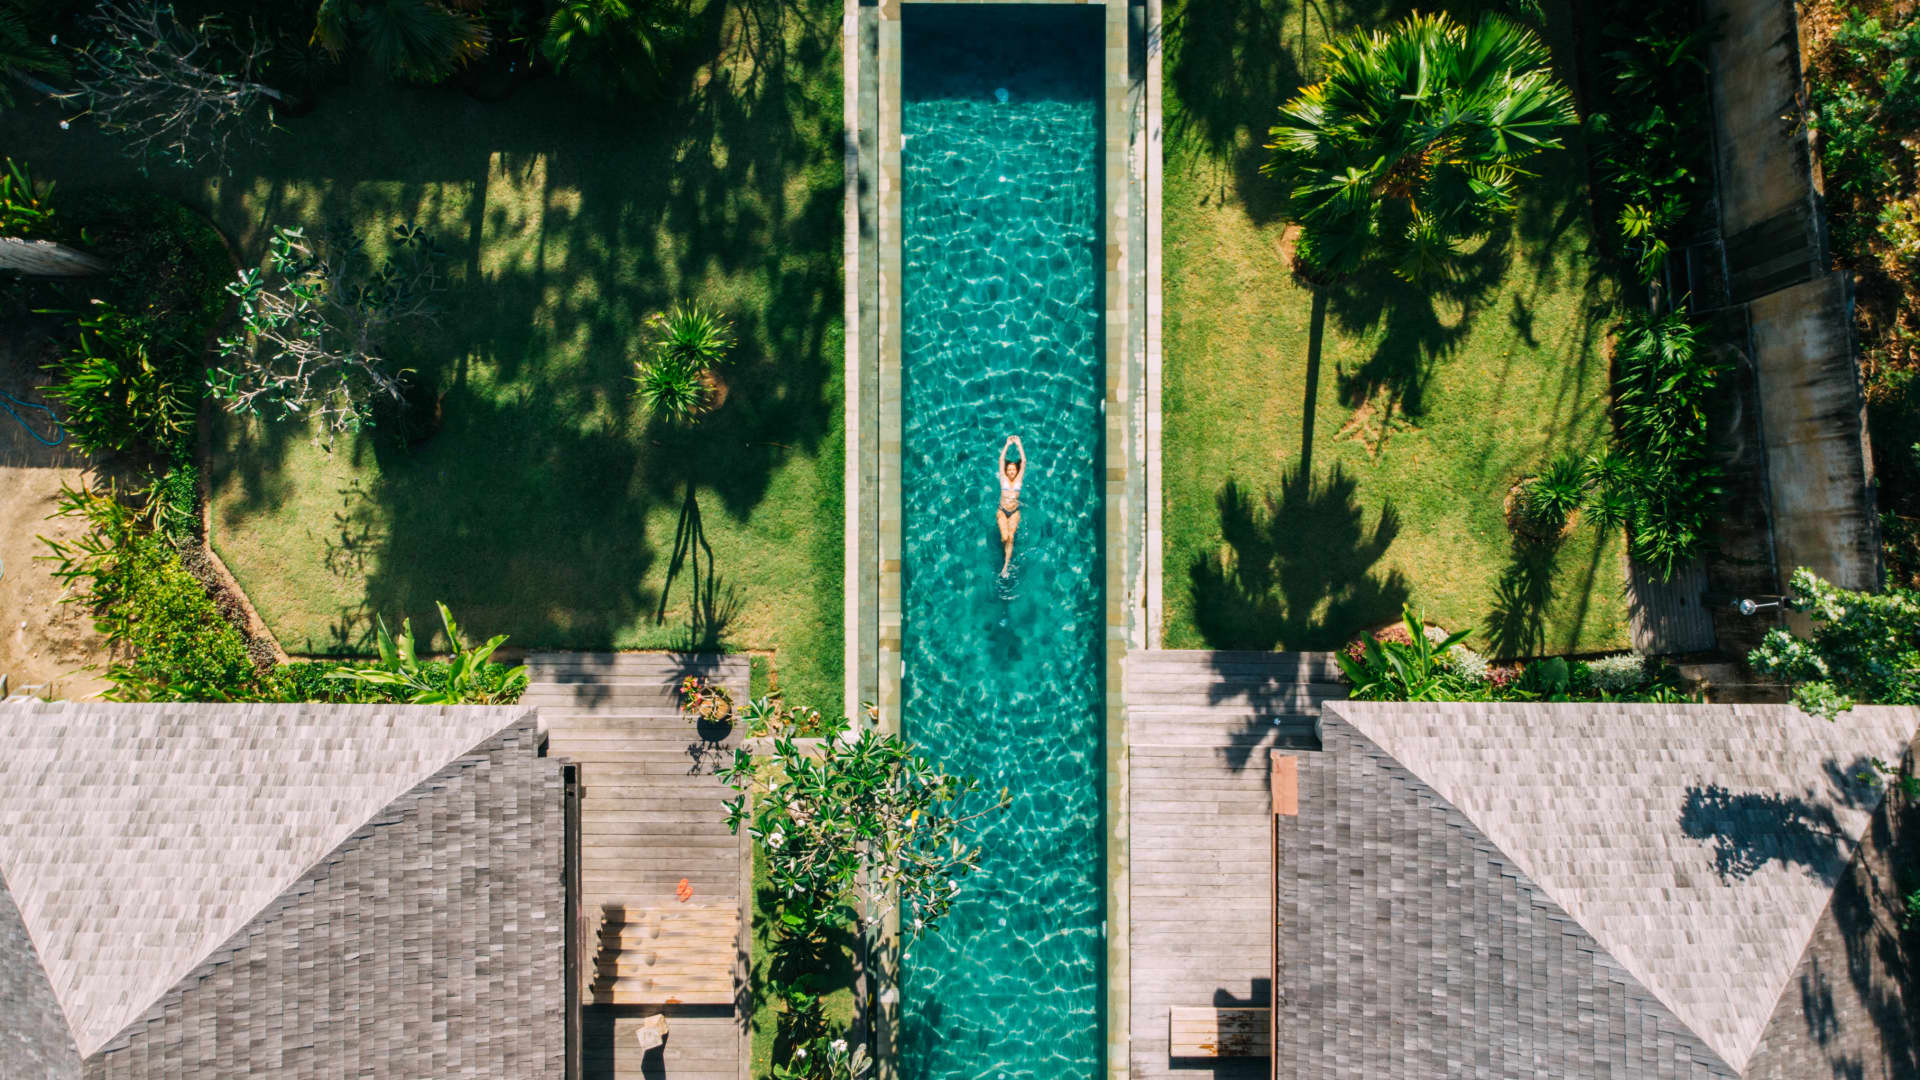 Living and working in Bali isn't the same as going for a holiday, cautioned long-term digital nomad Marta Grutka.